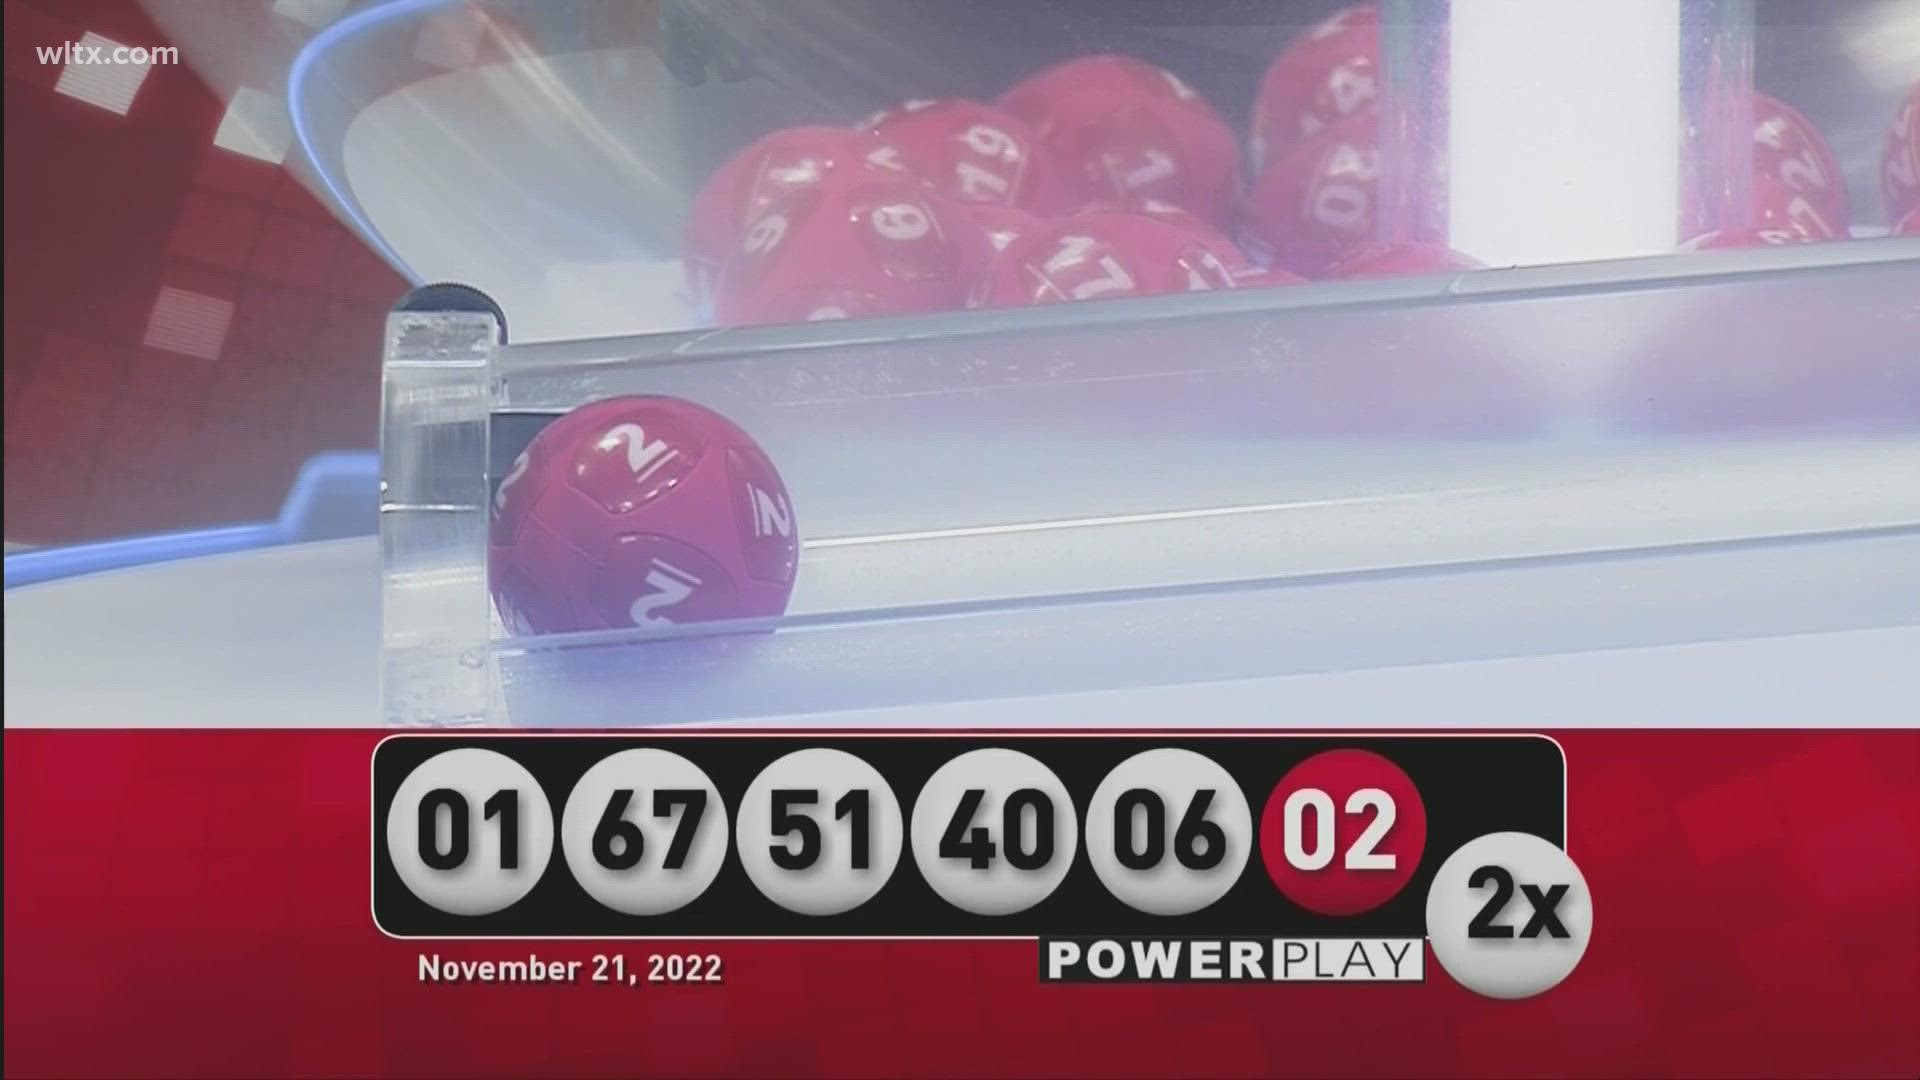 Here are the Powerball winning numbers for November 21, 2022.